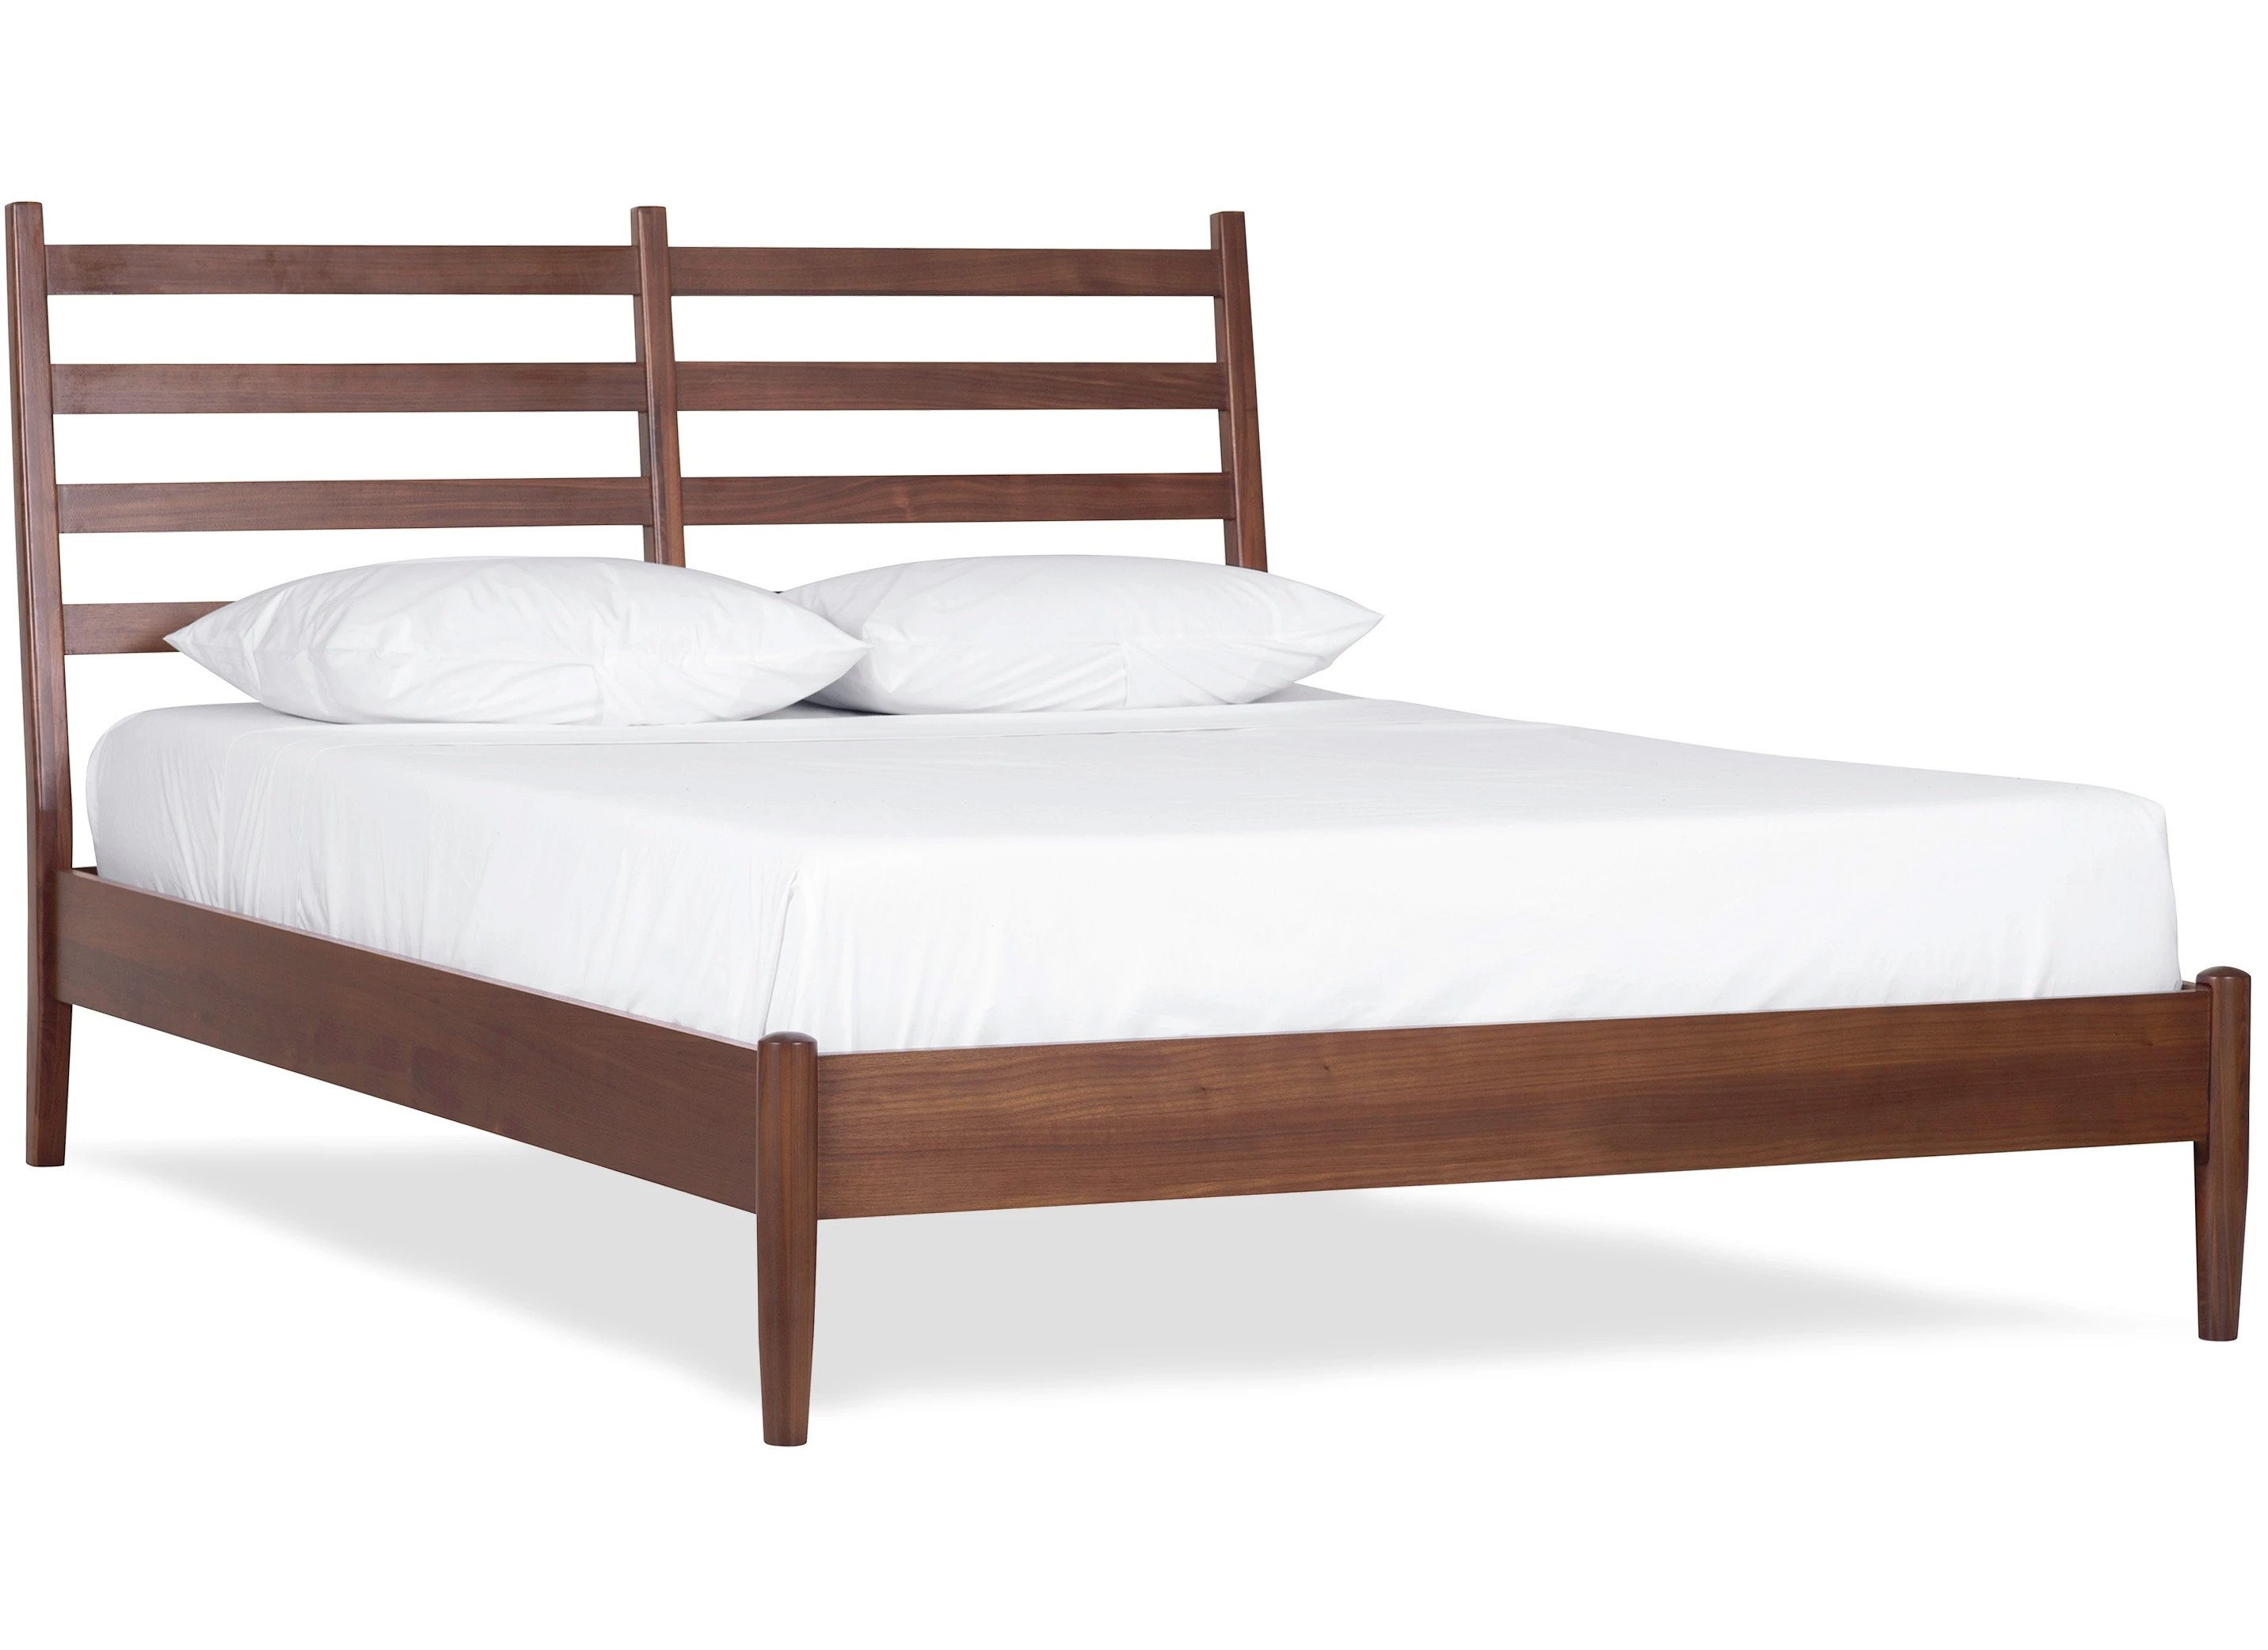 Image of Truro Bed